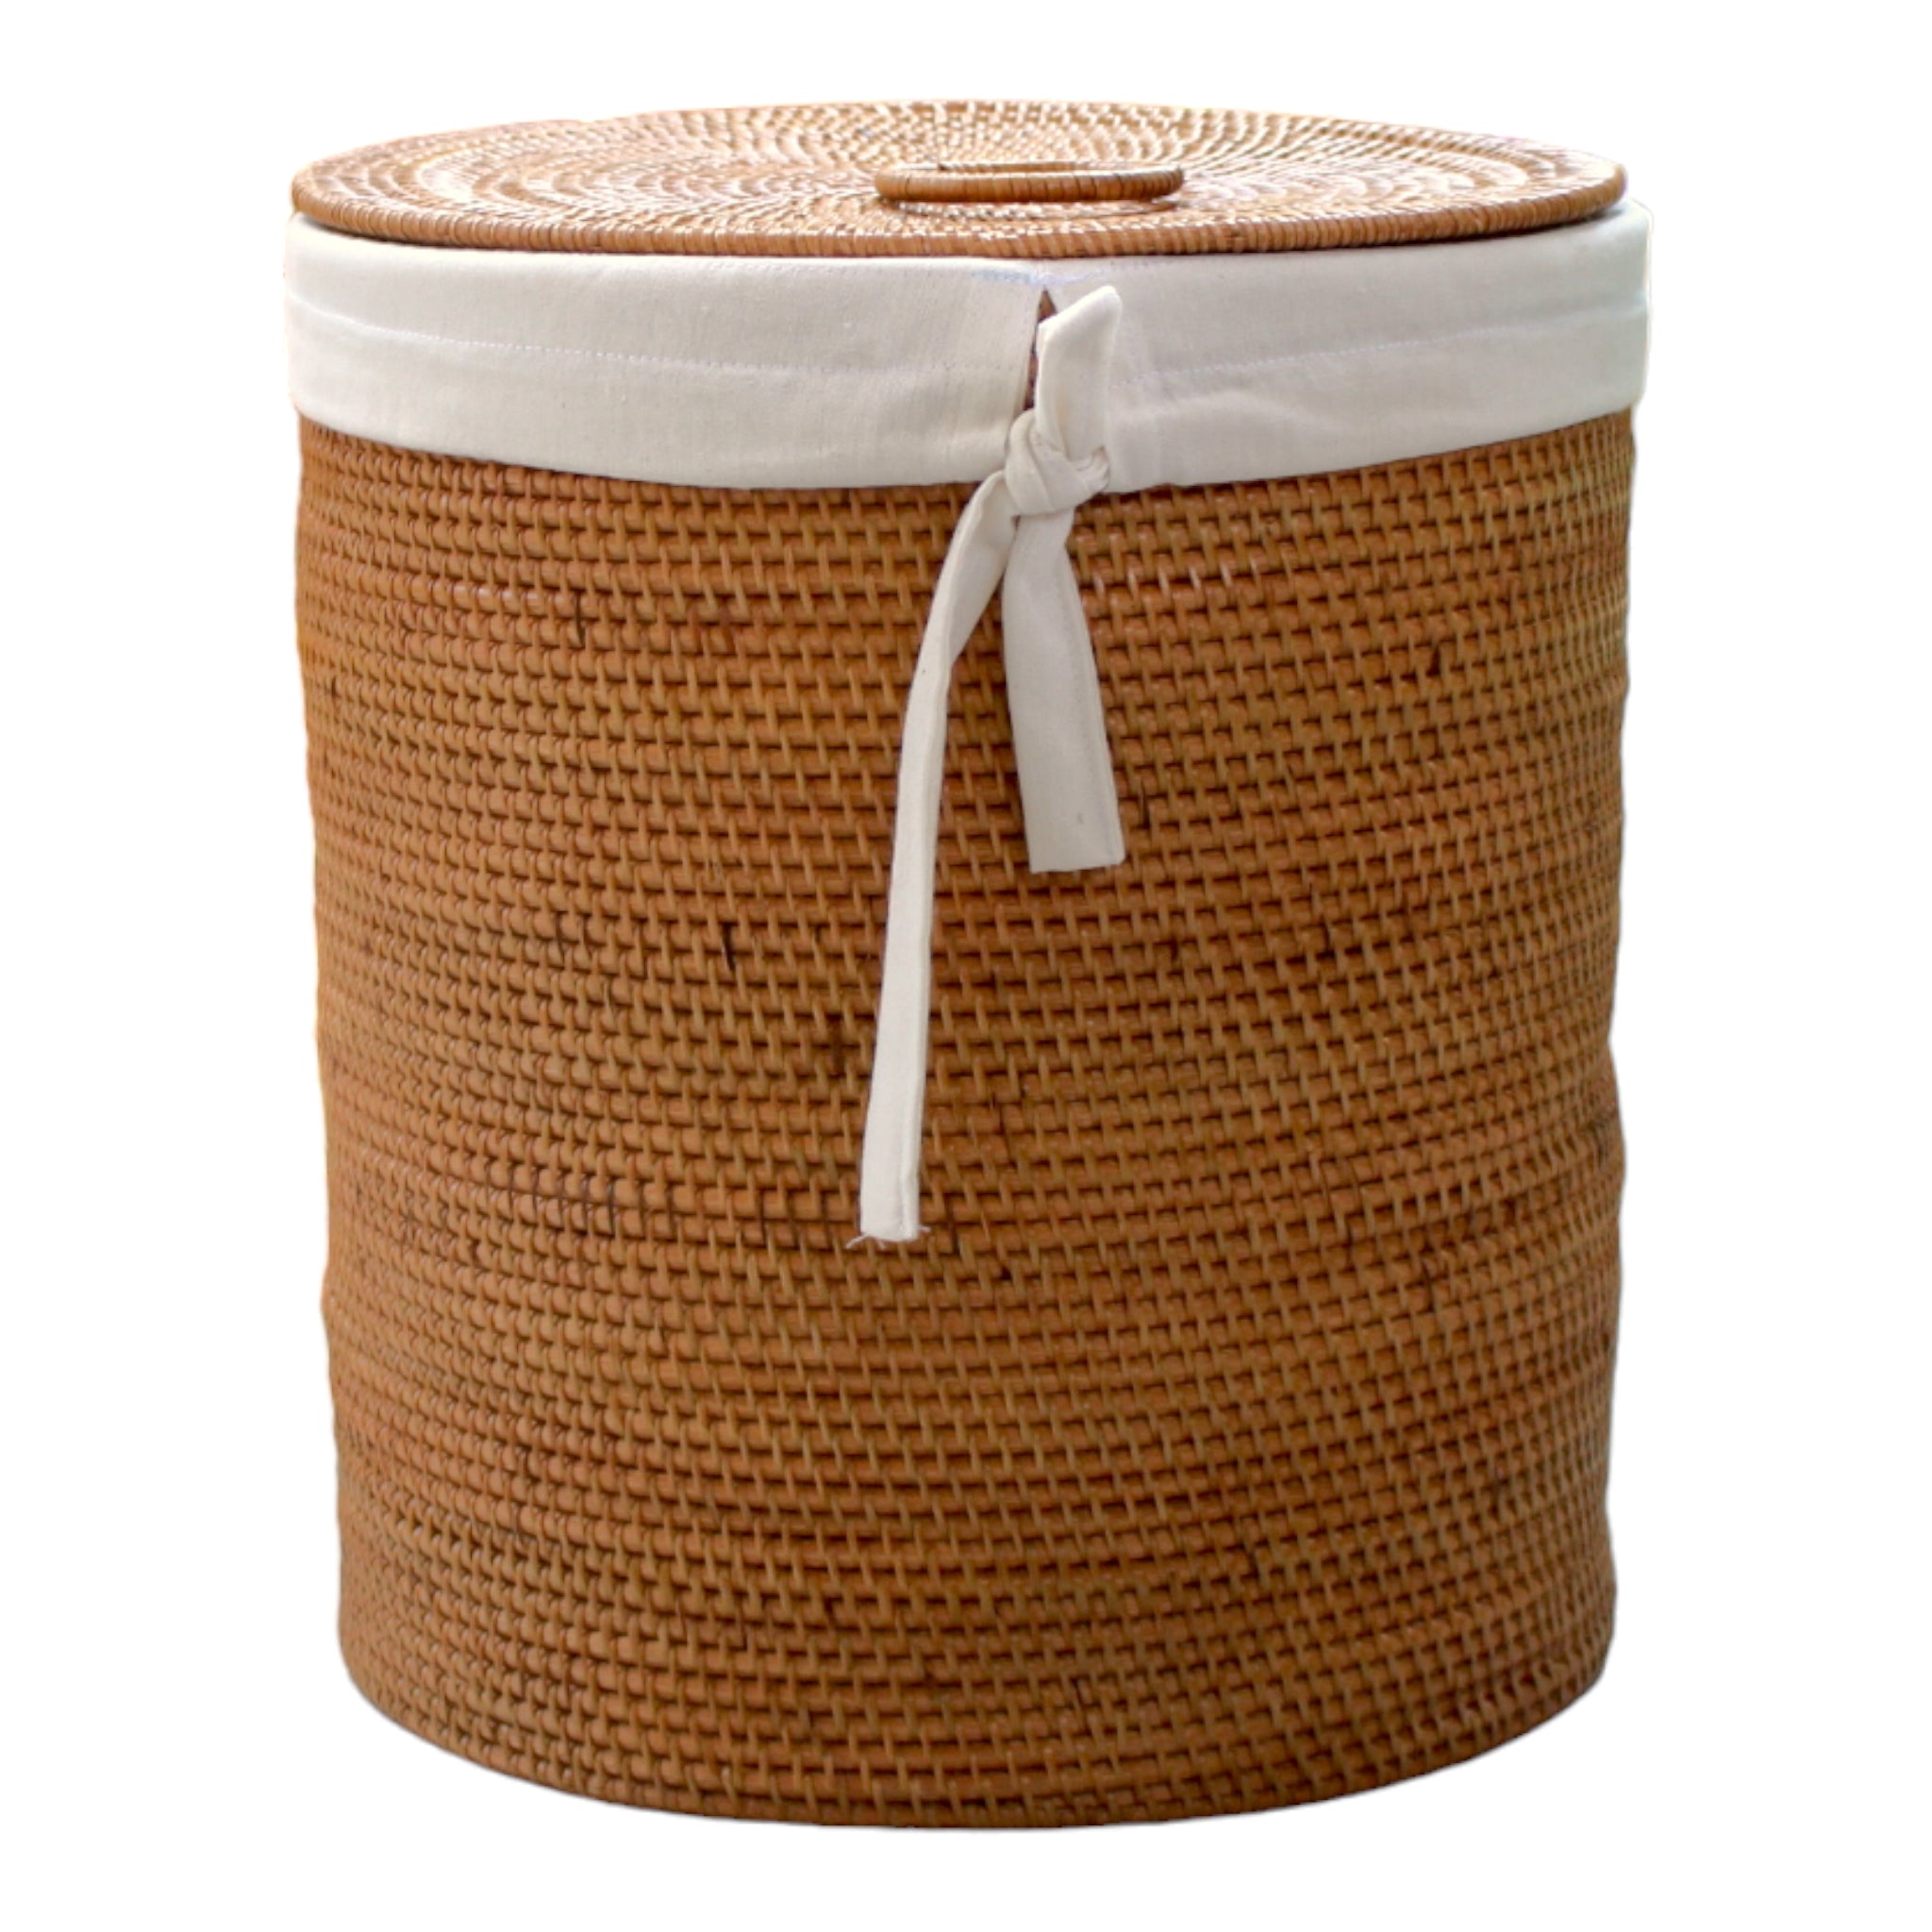 Handwoven Honey-Brown Rattan Hamper with Lining and Lid 